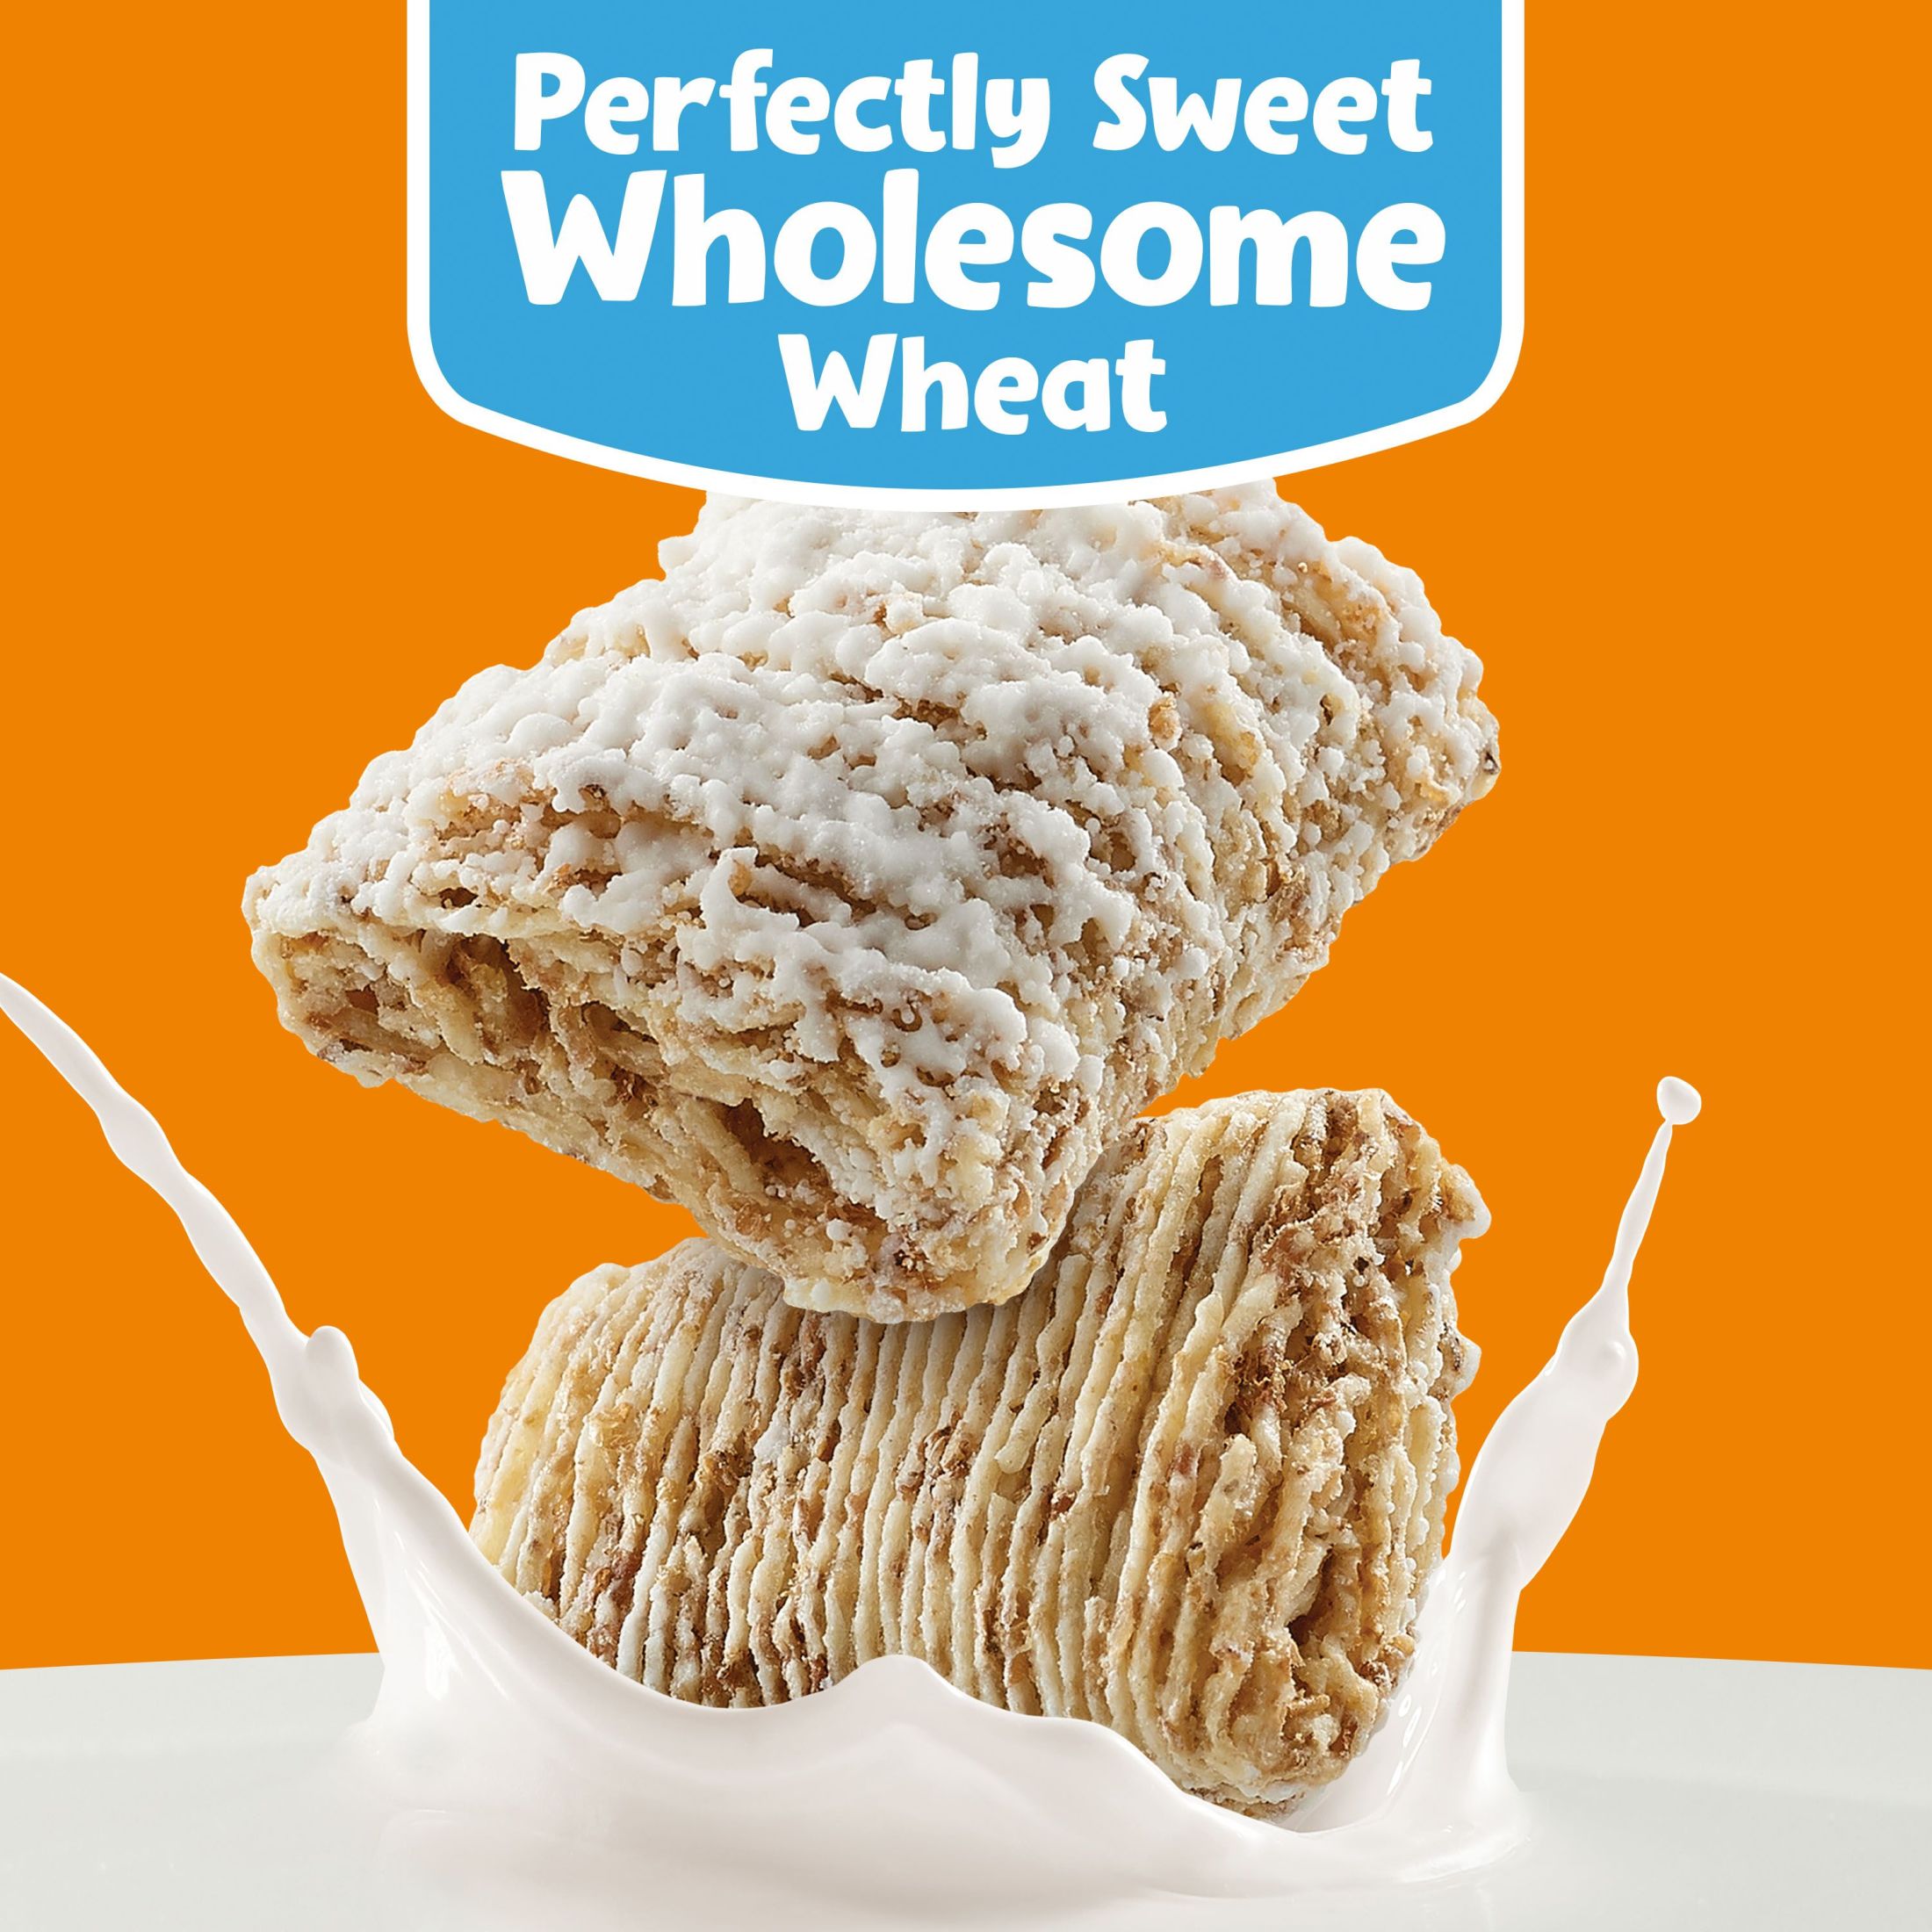 Kellogg's Frosted Mini-Wheats Original Breakfast Cereal, Family Size, 24 oz Box - image 3 of 13